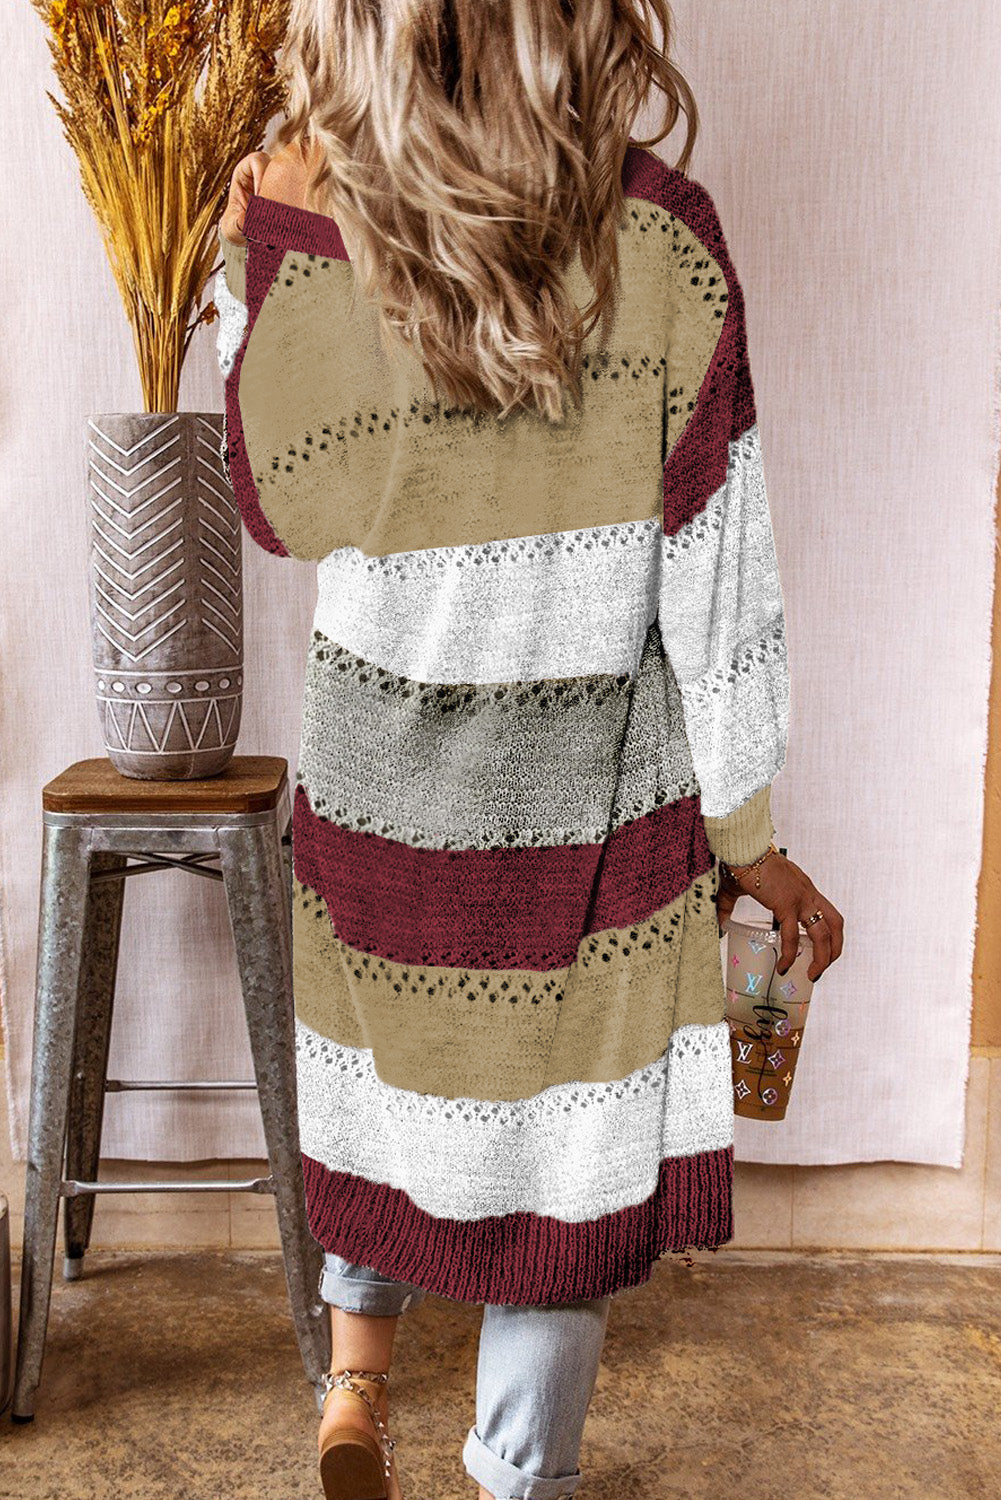 Multicolor Color Block Eyelet Knitted Lightweight Cardigan